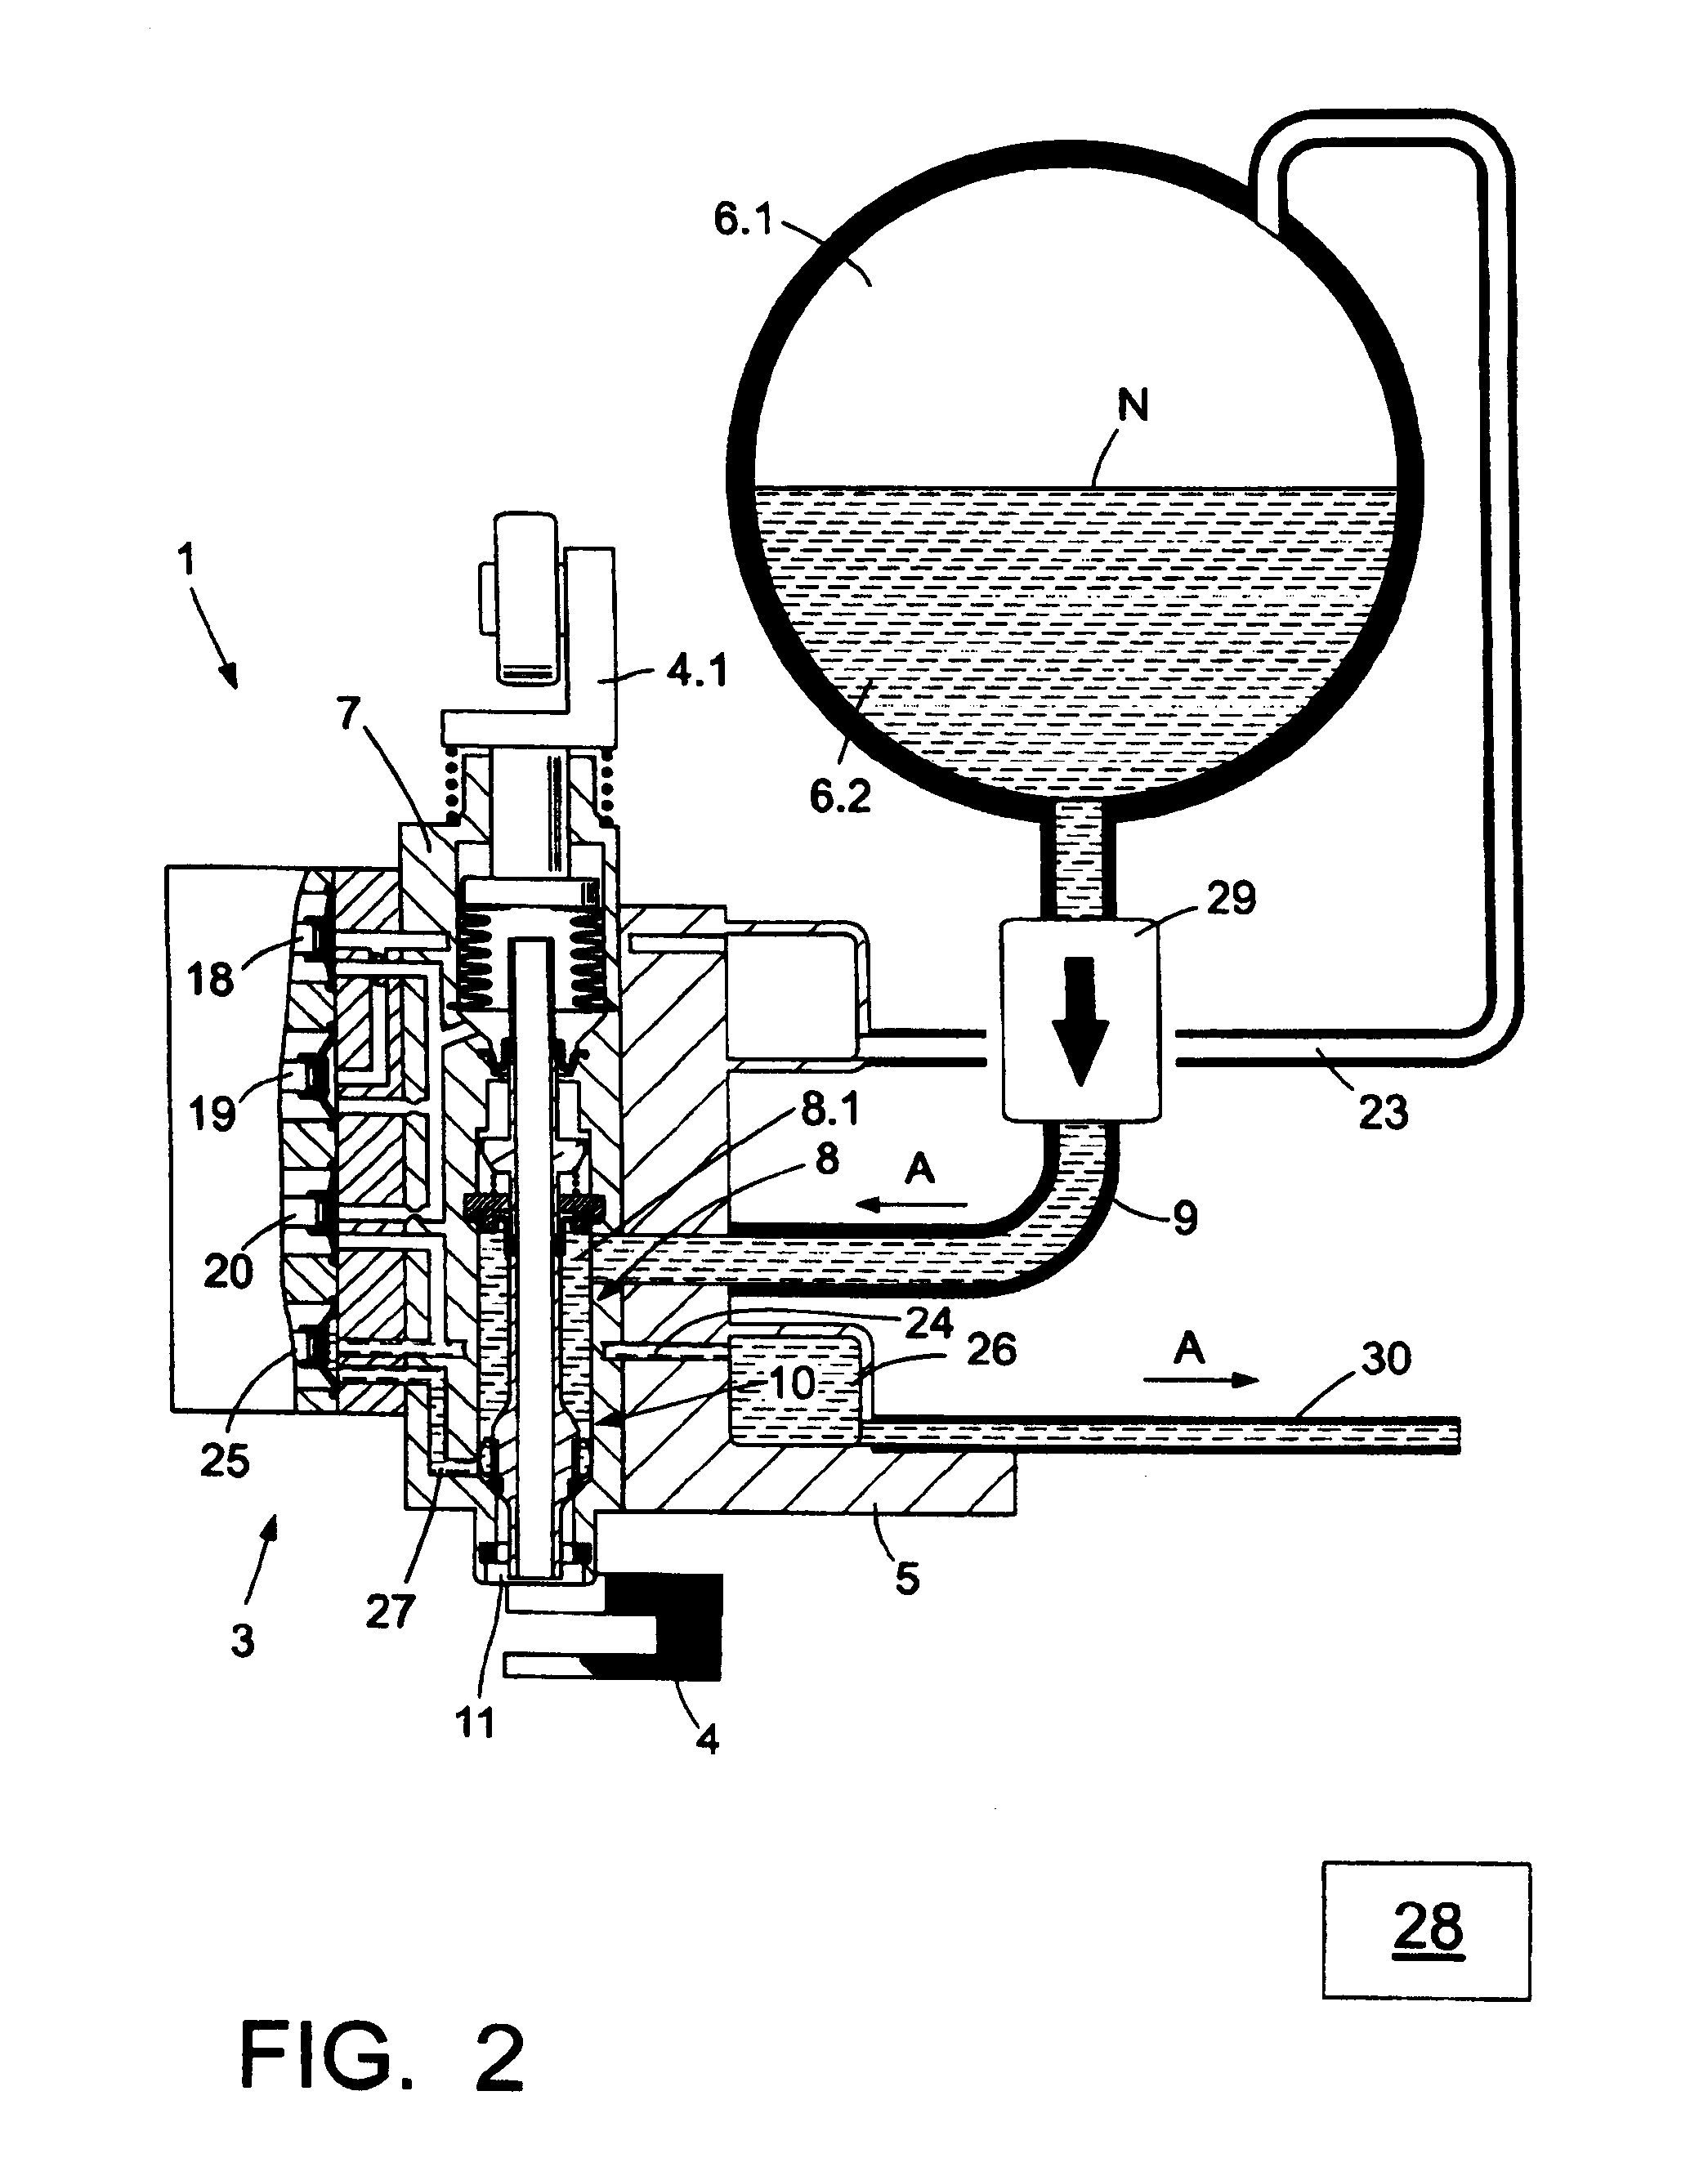 Filling system for hot filling of beverage bottles or containers in a bottle or container filling plant